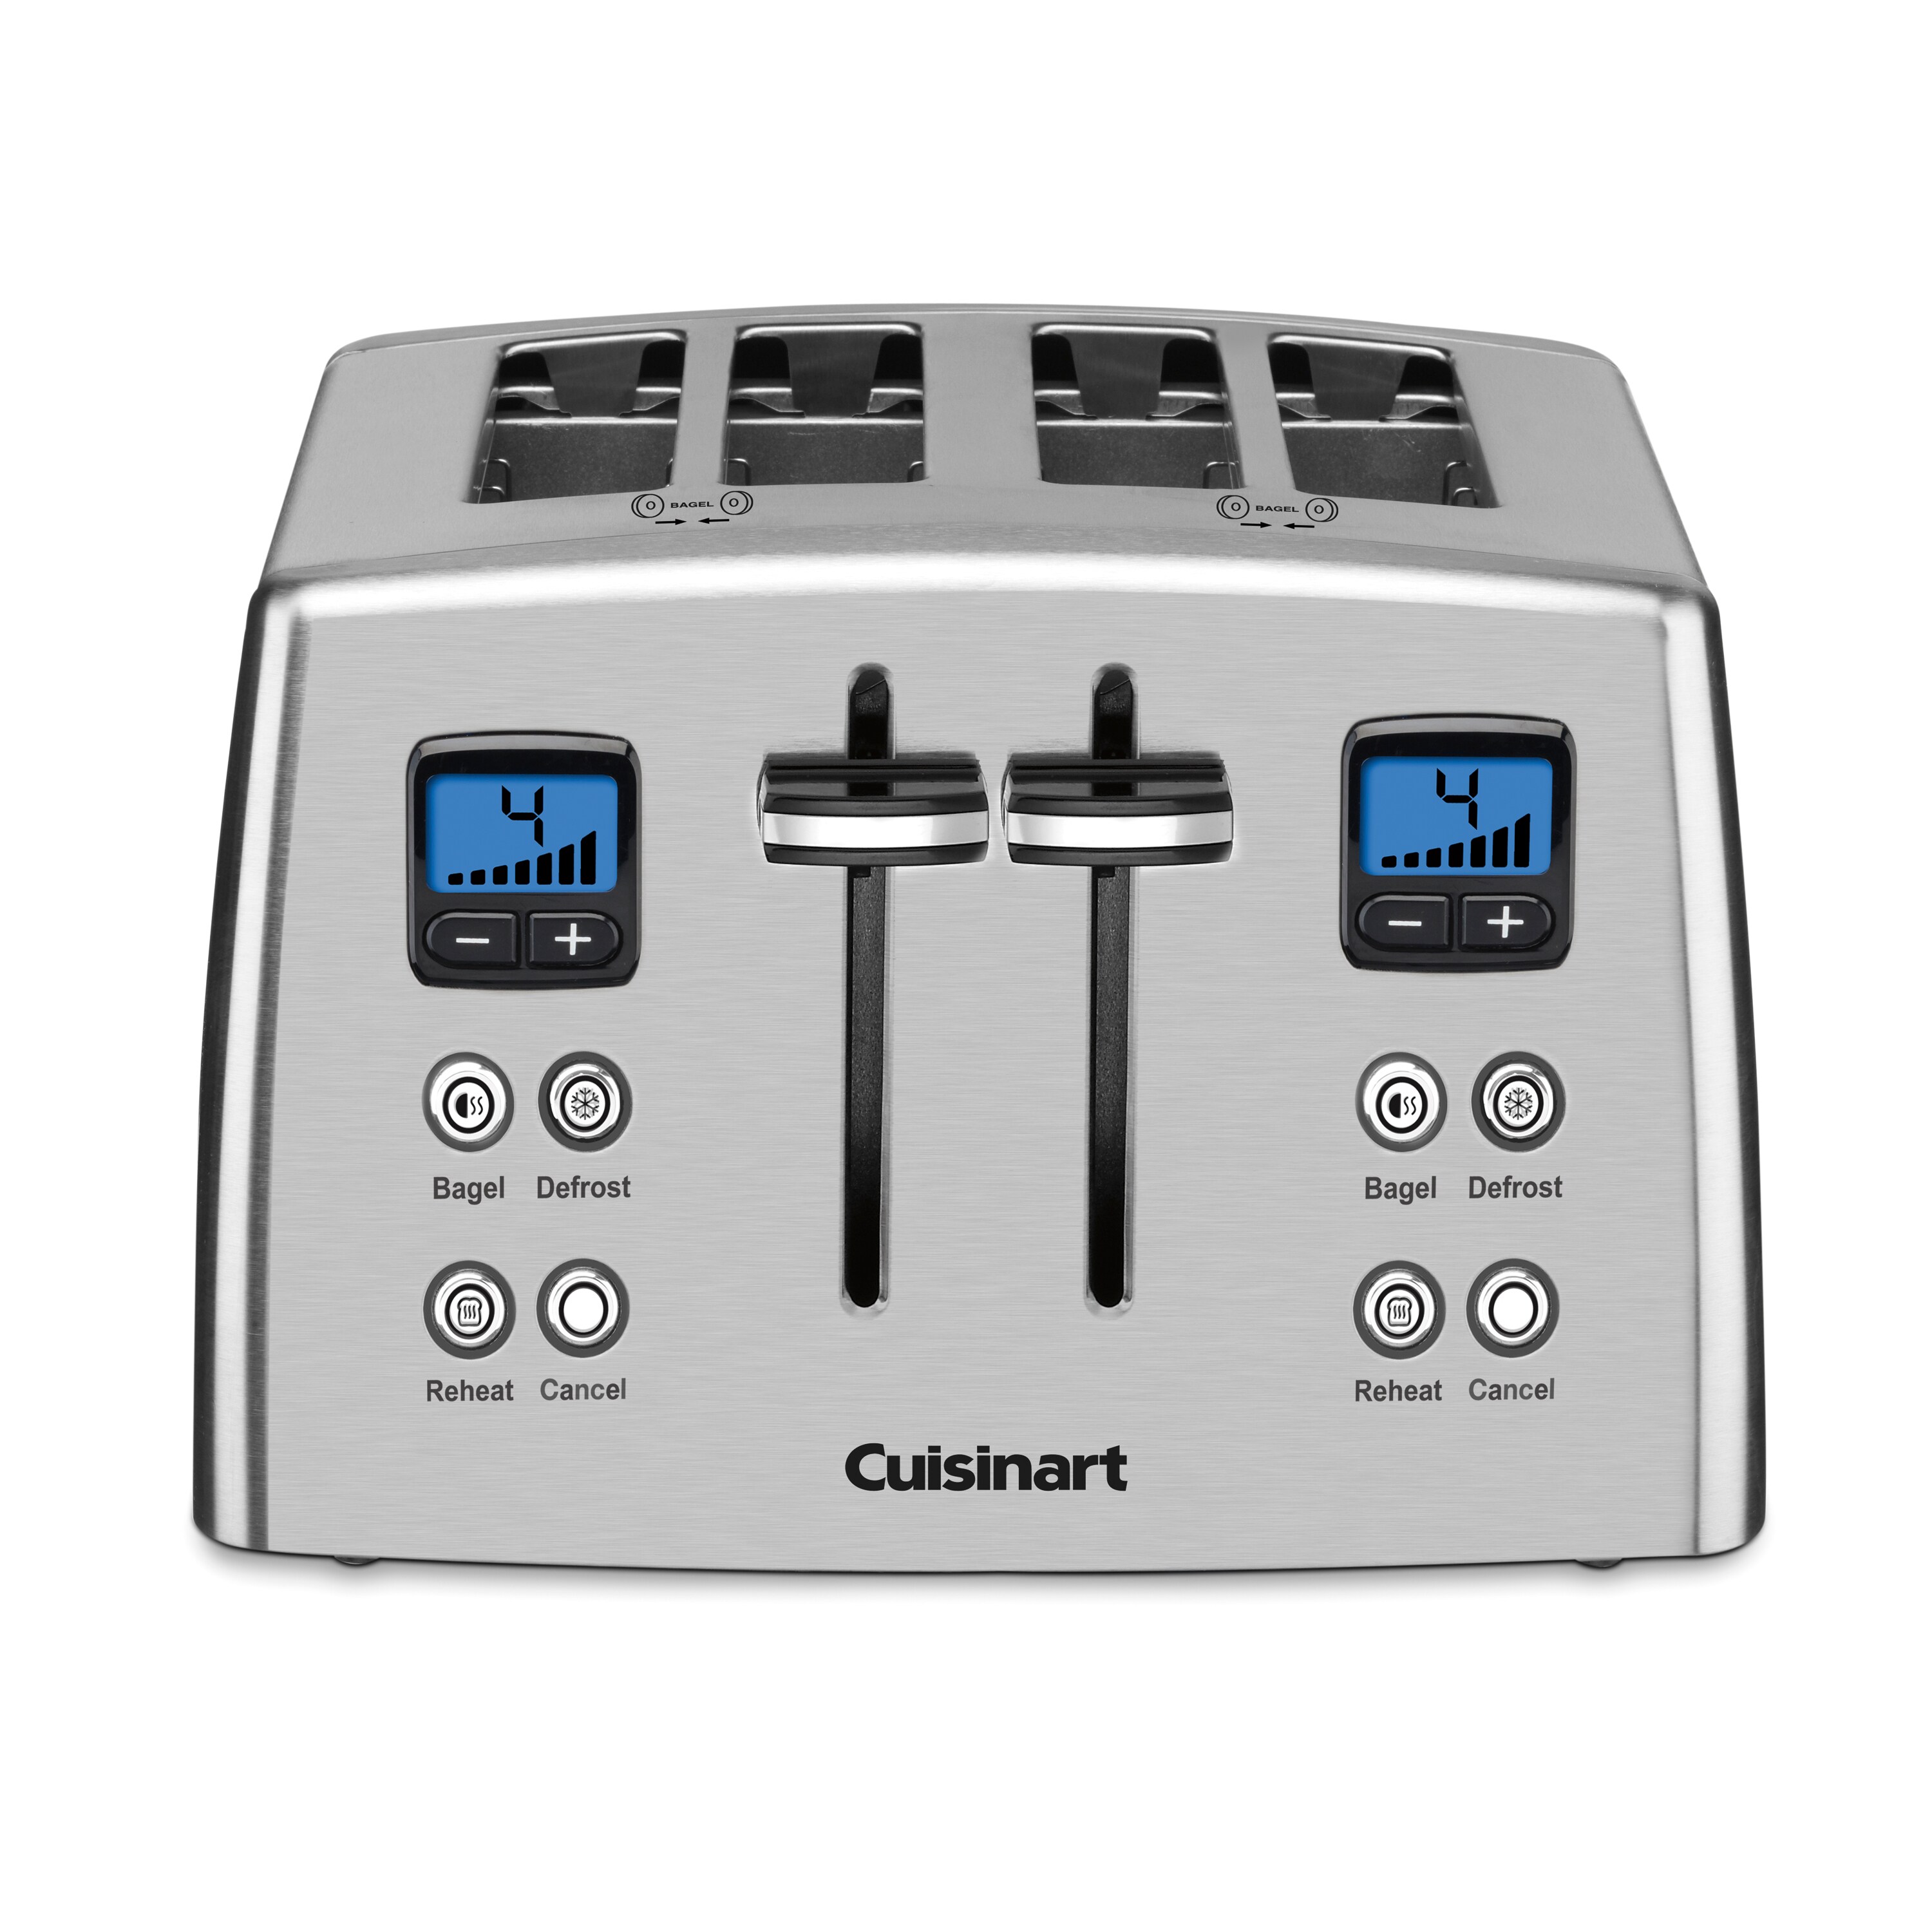 Cuisinart 4 Slice Toaster, Compact Toaster for Toast, Bagels, Defrost,  Reheat & More, Stainless Steel/Black, CPT-340P1